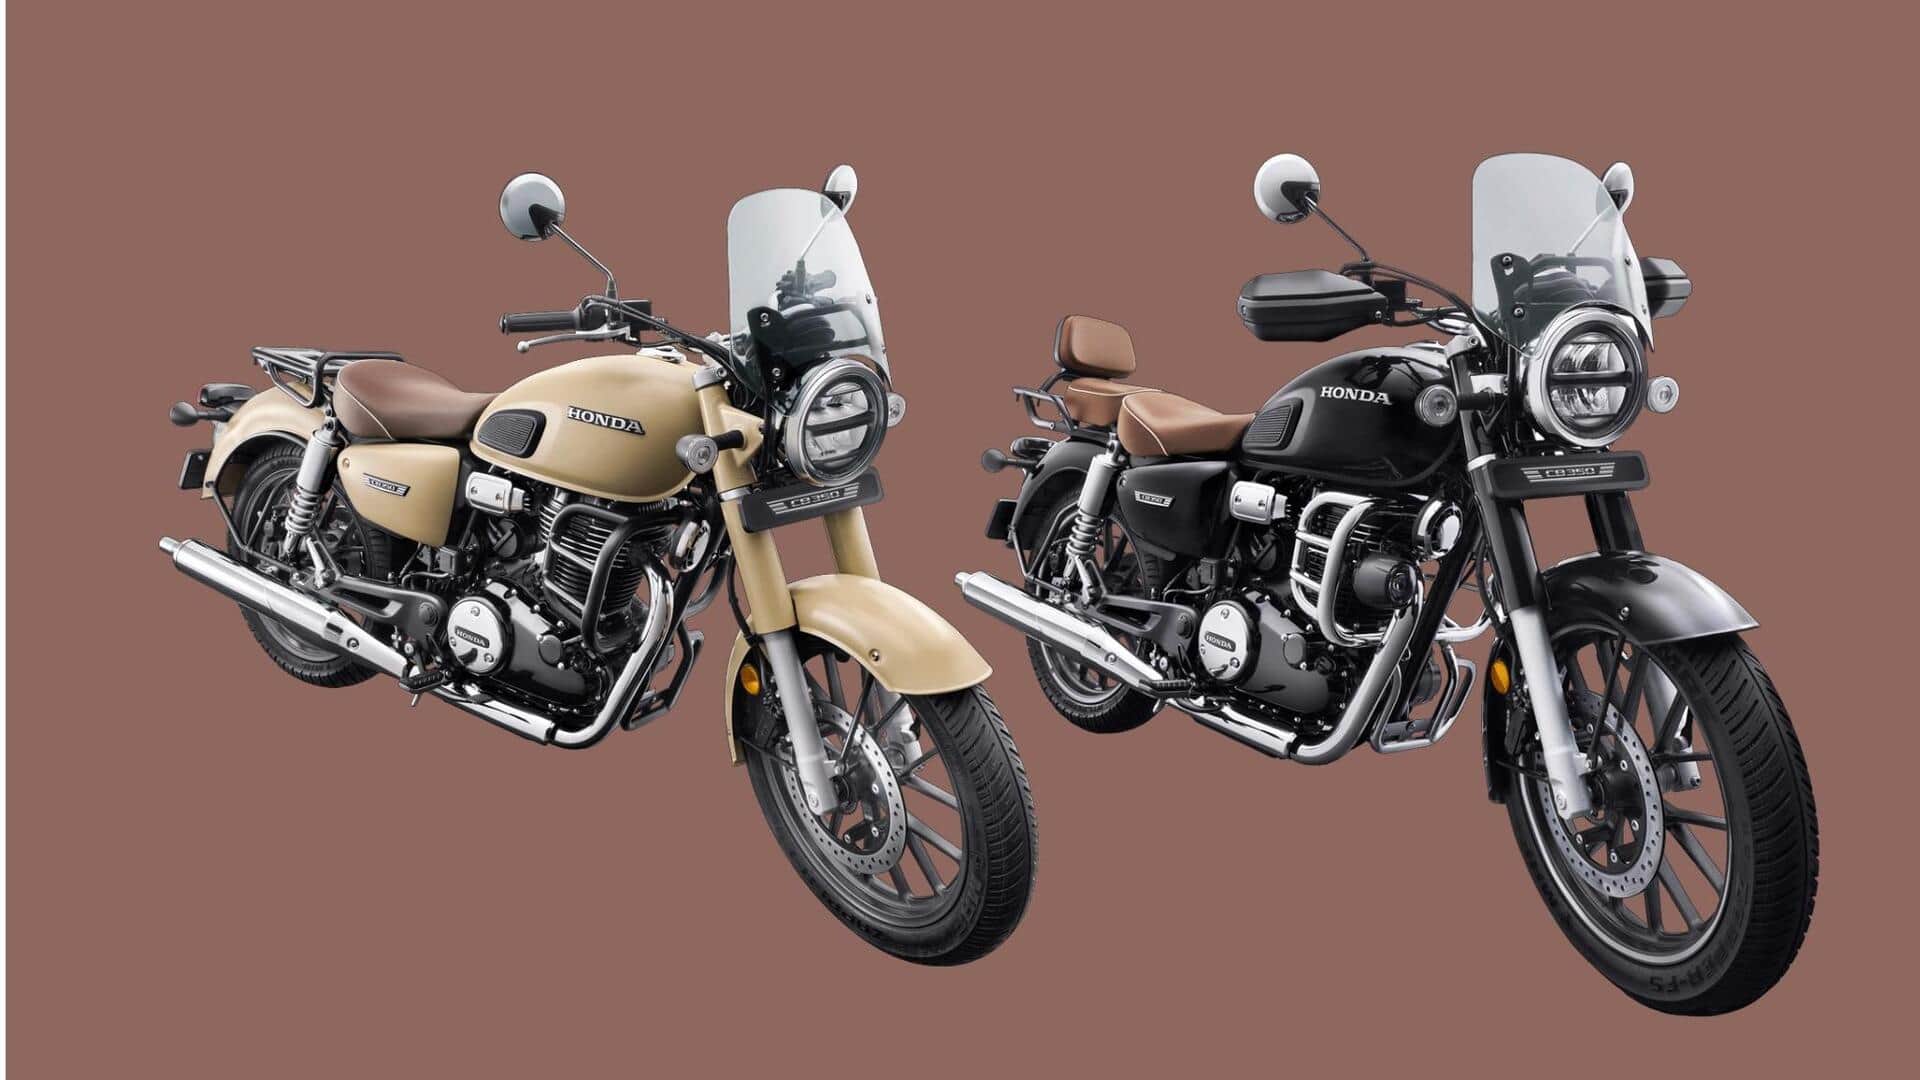 RE Classic 350-rivaling Honda CB350 debuts: Check best features 